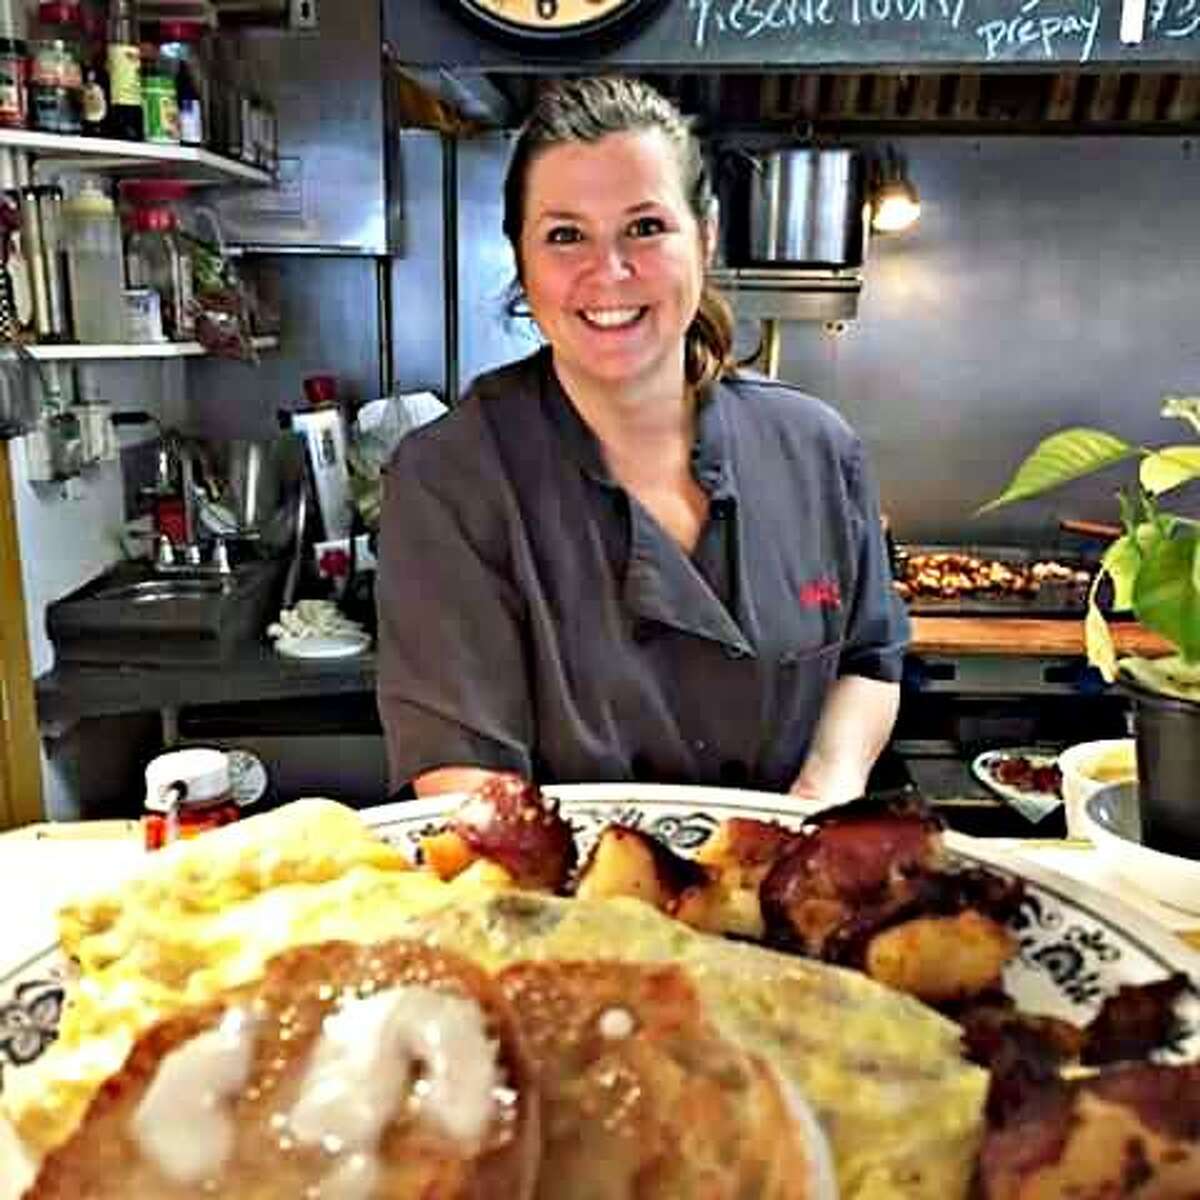 The Whistle Stop Cafe in Deep River marks its 25th year in October. Here, owner Hedy Watrous serves up a hearty breakfast.